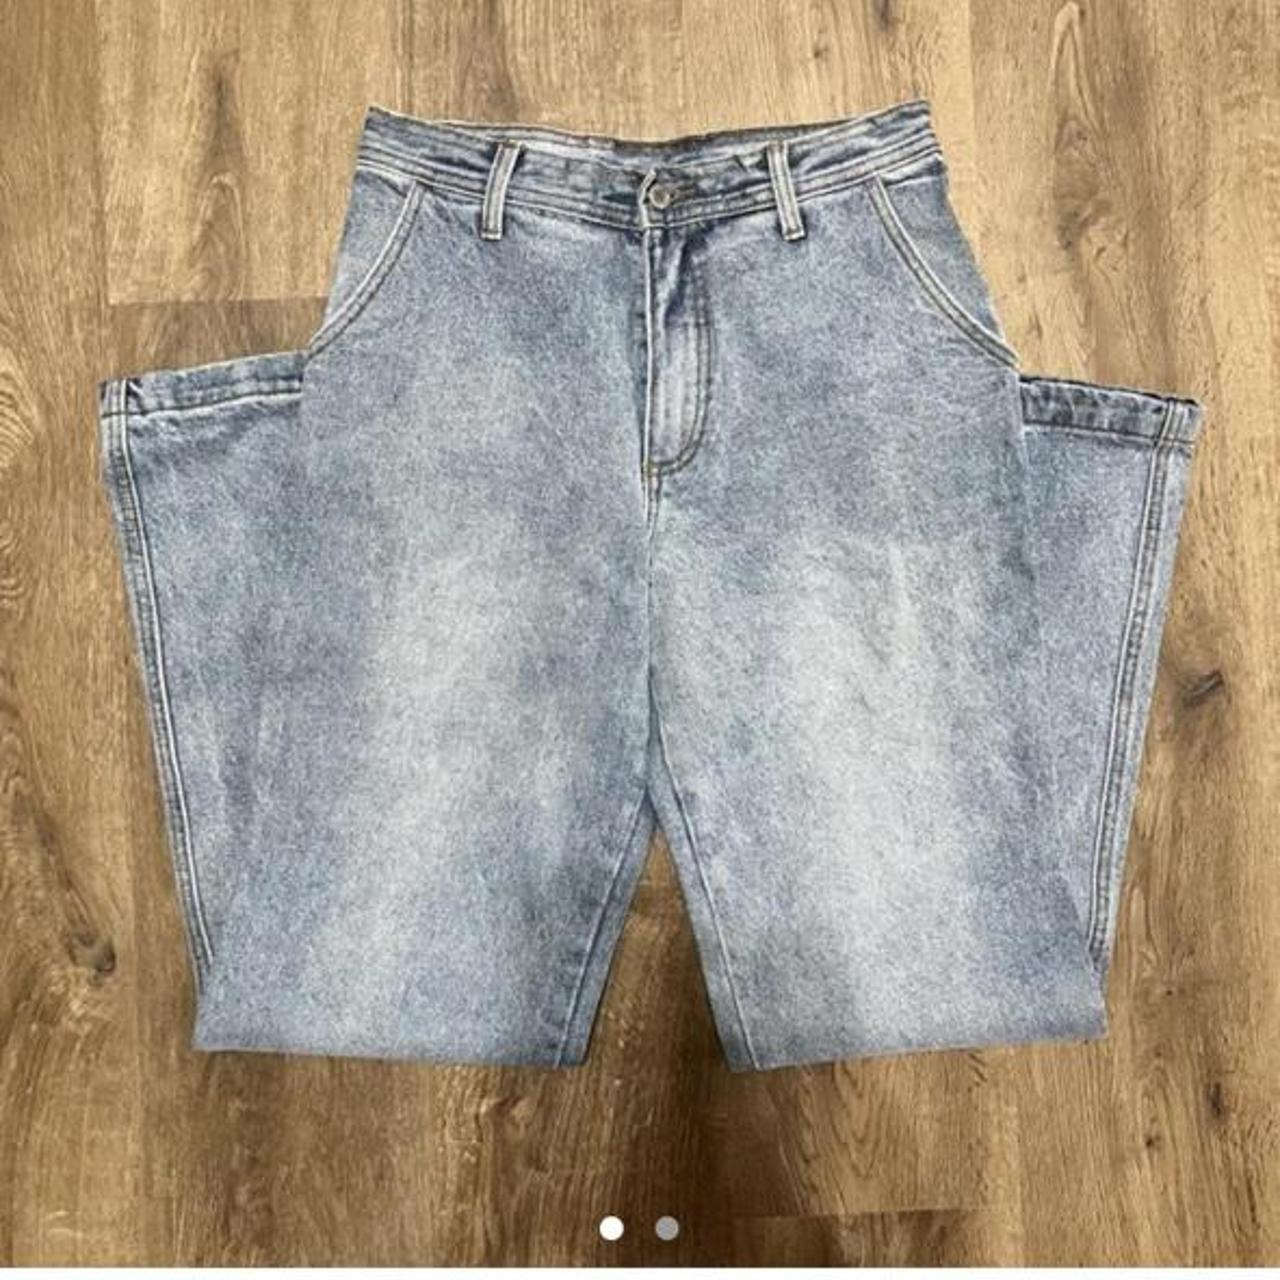 Brandy addison jeans!!! these r repops and have... - Depop